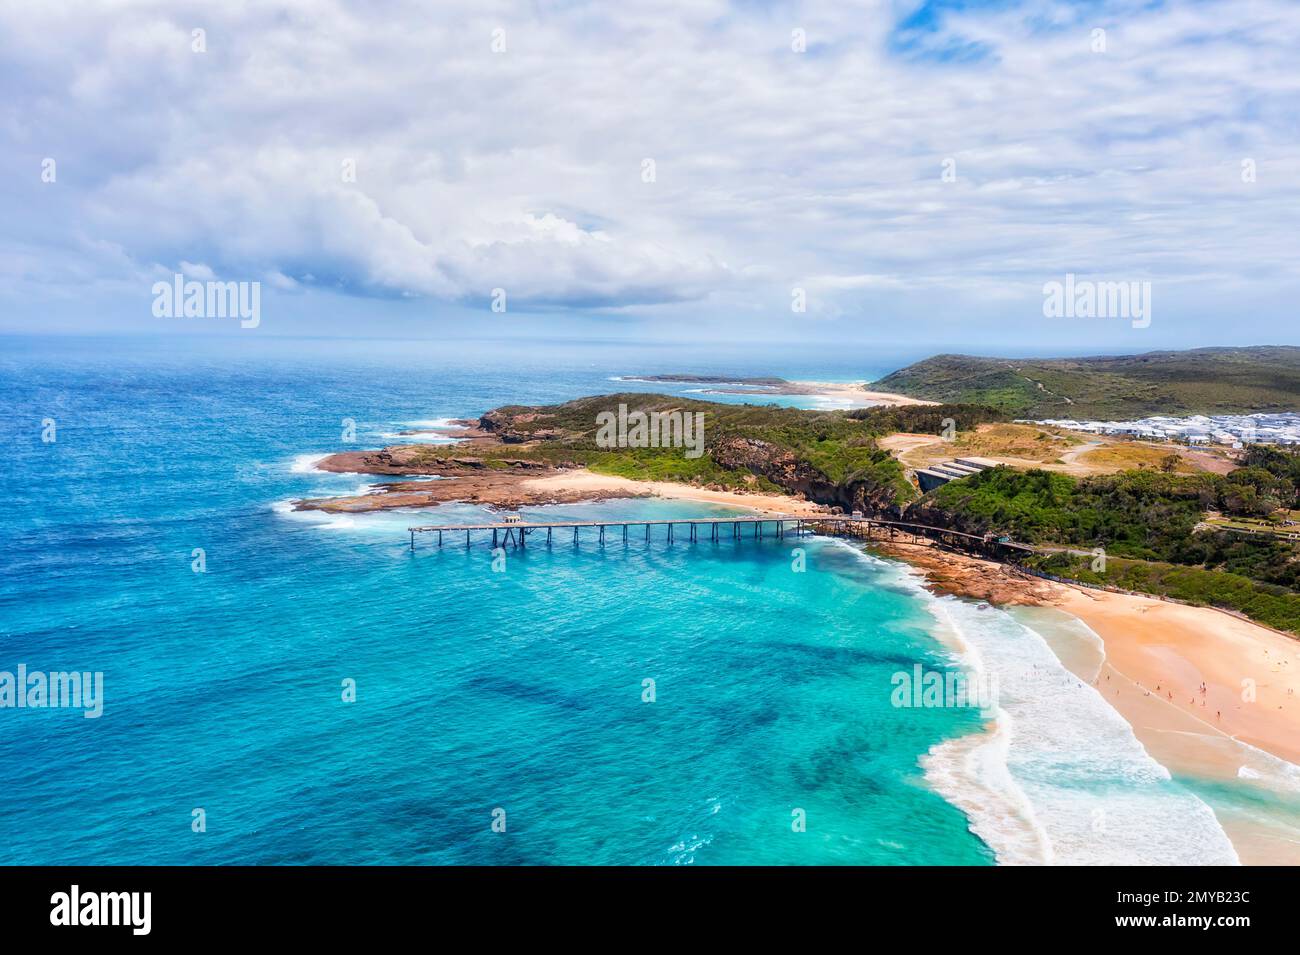 Scenic seascape waterfront of Pacific ocean beach at Catherine Hill bay of Australia. Stock Photo